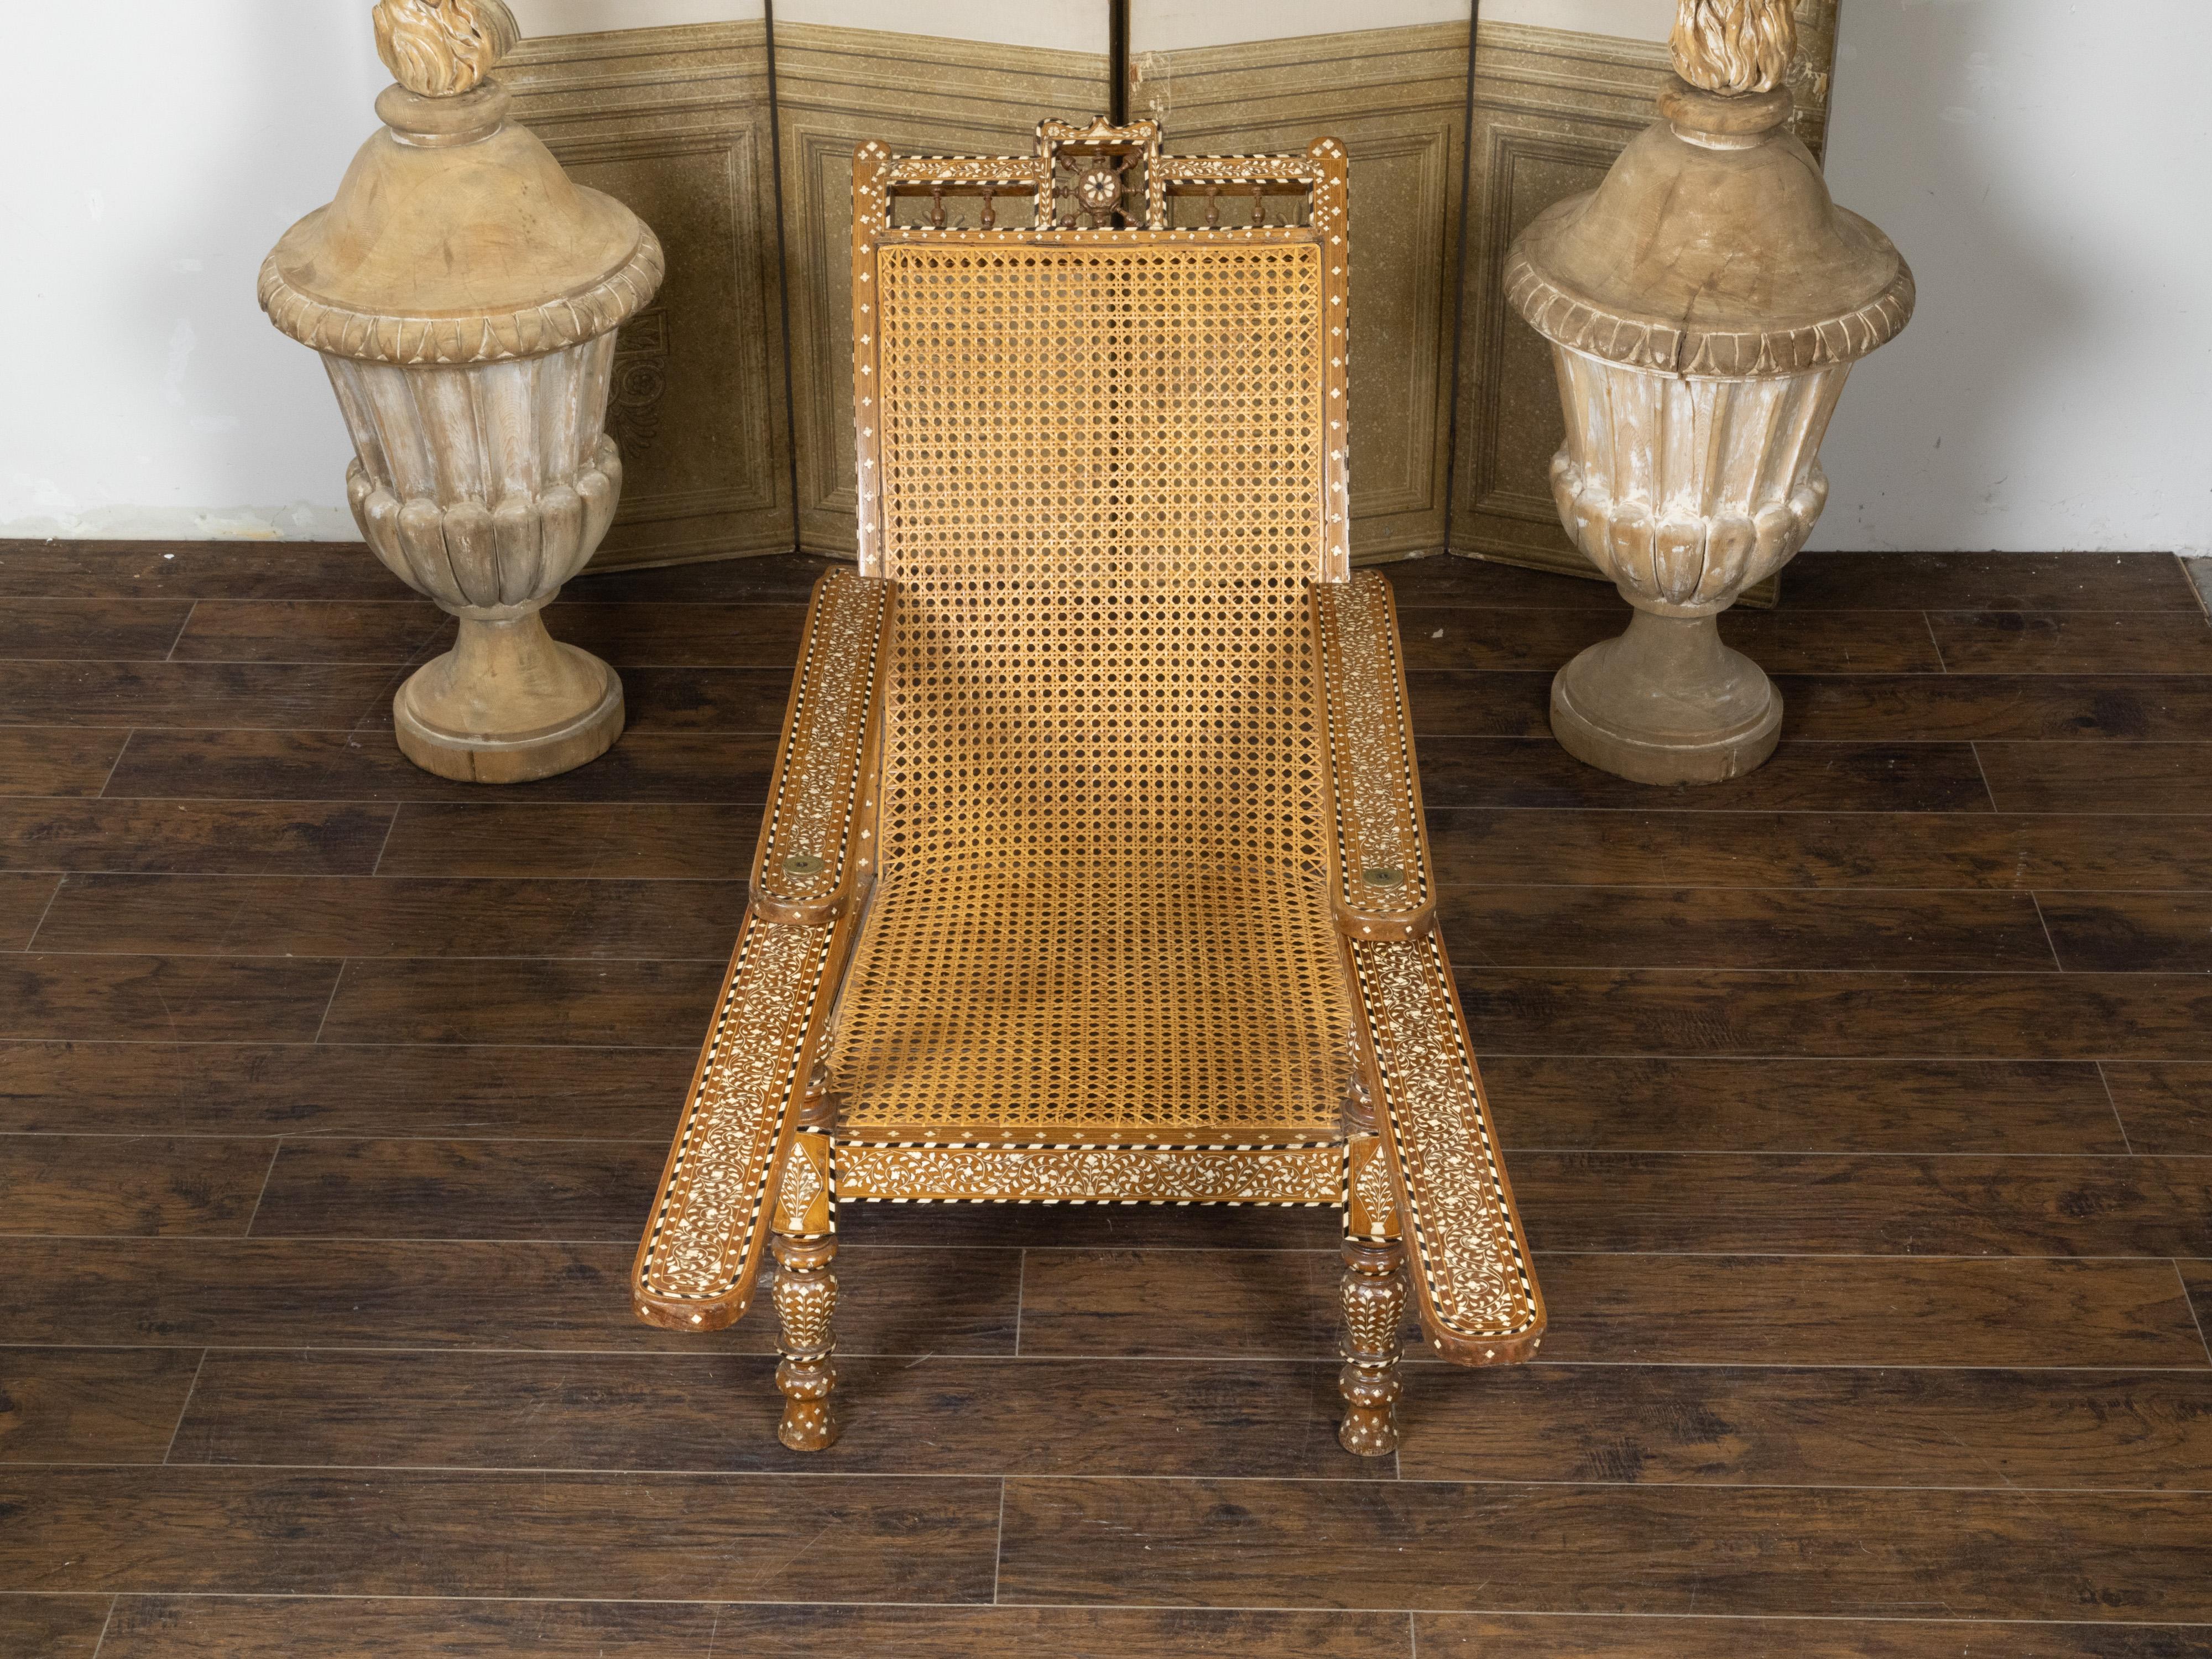 Cane Anglo-Indian Inlaid Plantation Chair with Scrolling Foliage and Extending Arms For Sale